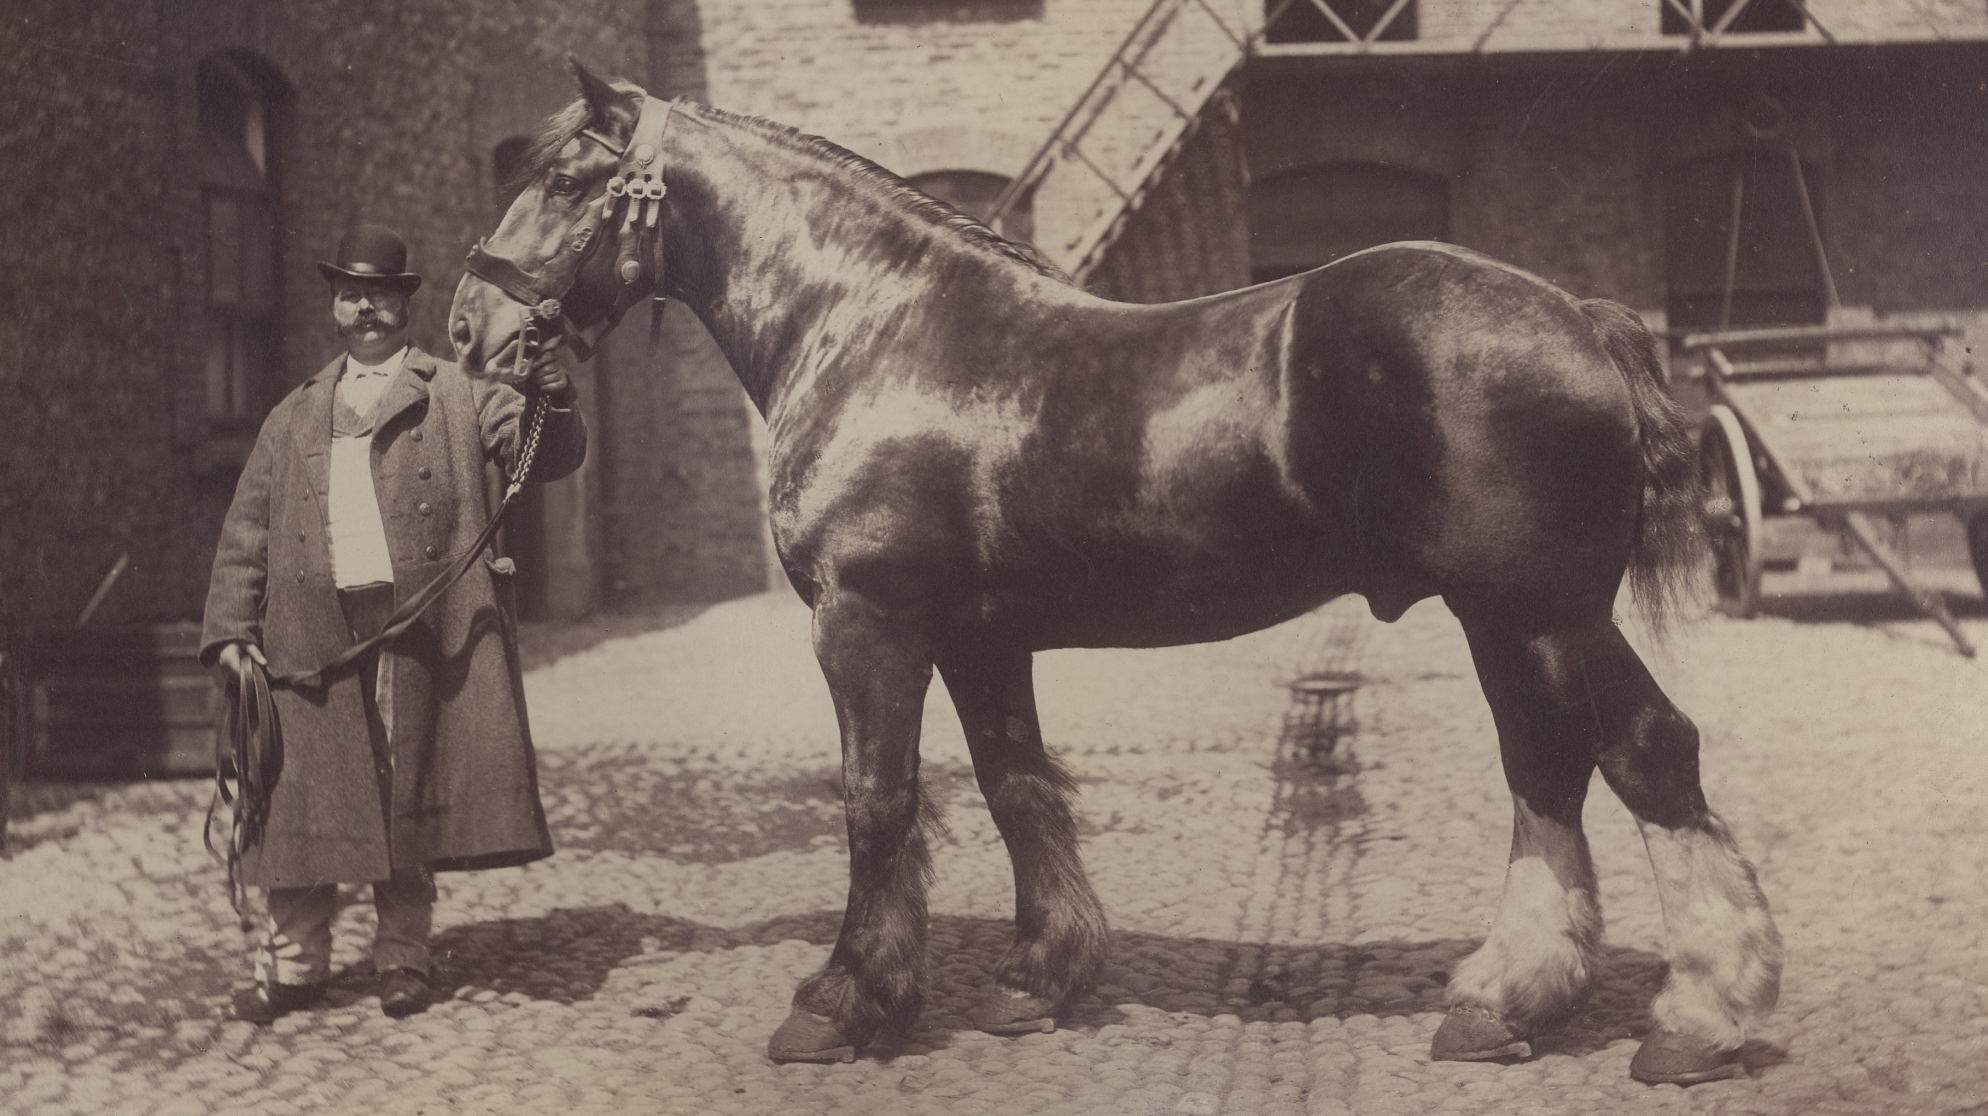 Drayman with Gordon the horse at the stables, St. James’s Gate, c. 1885.